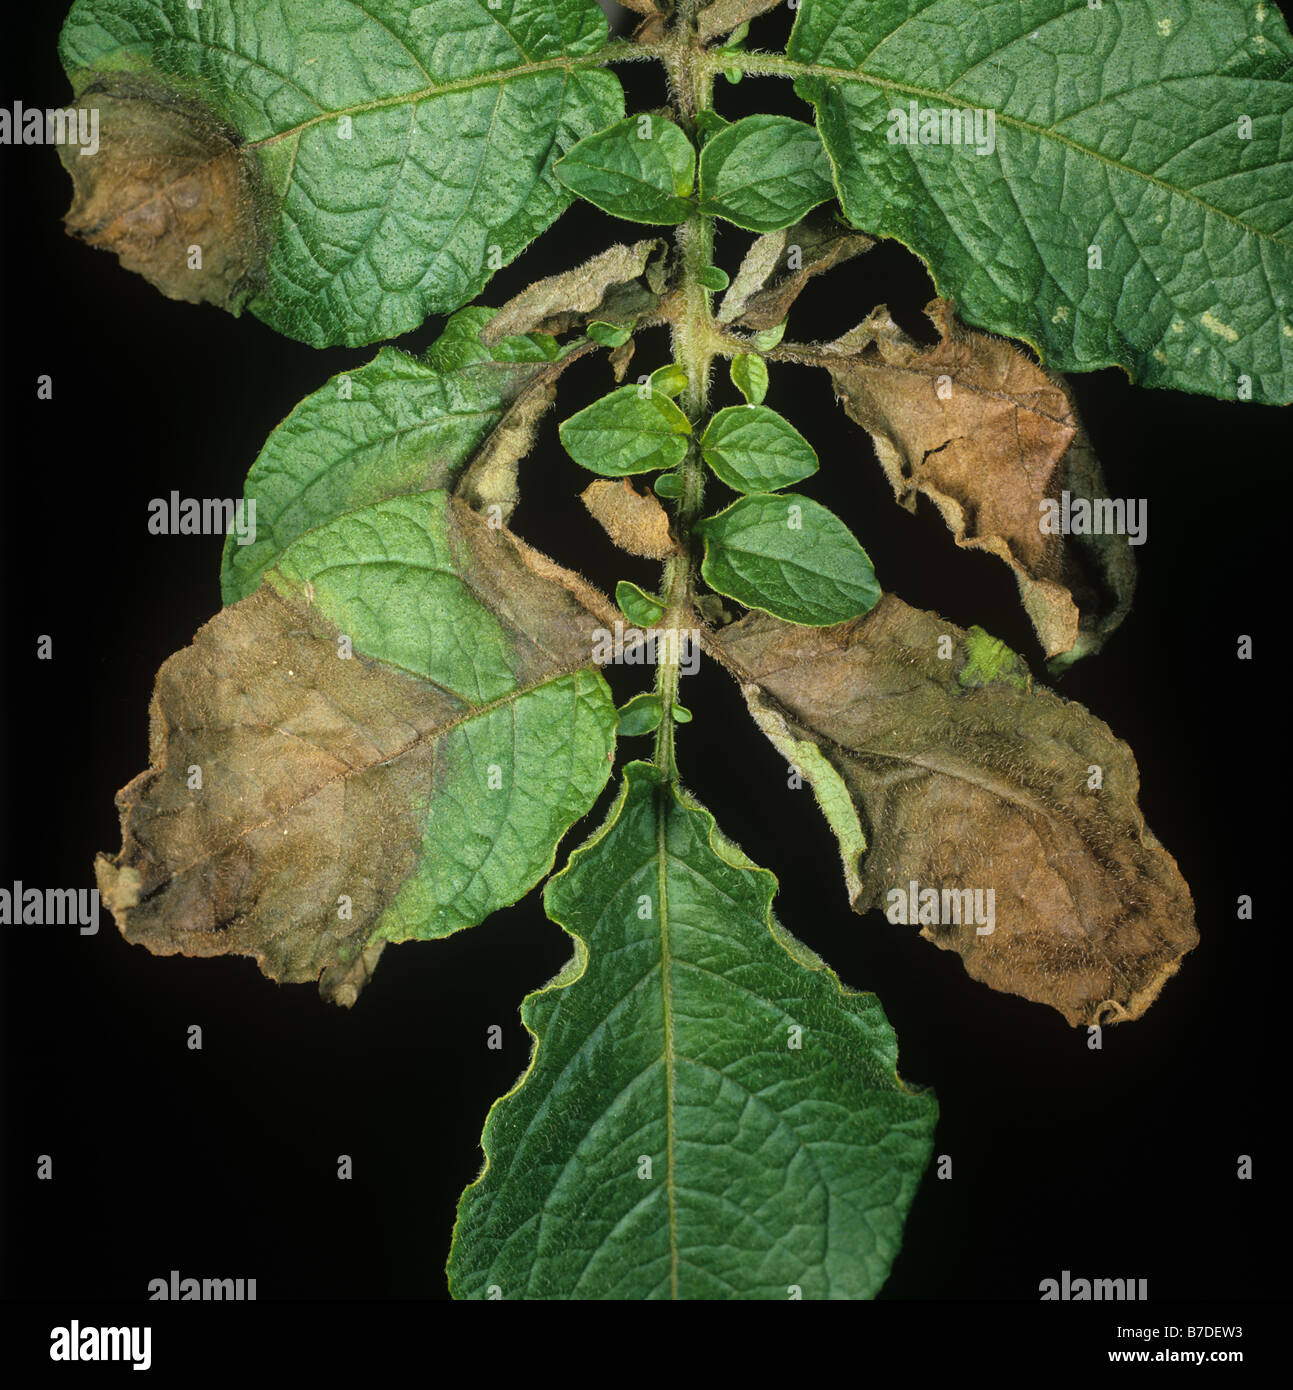 Potato late blight Phytophthora infestans necrotic disease lesions on potato leaves Stock Photo